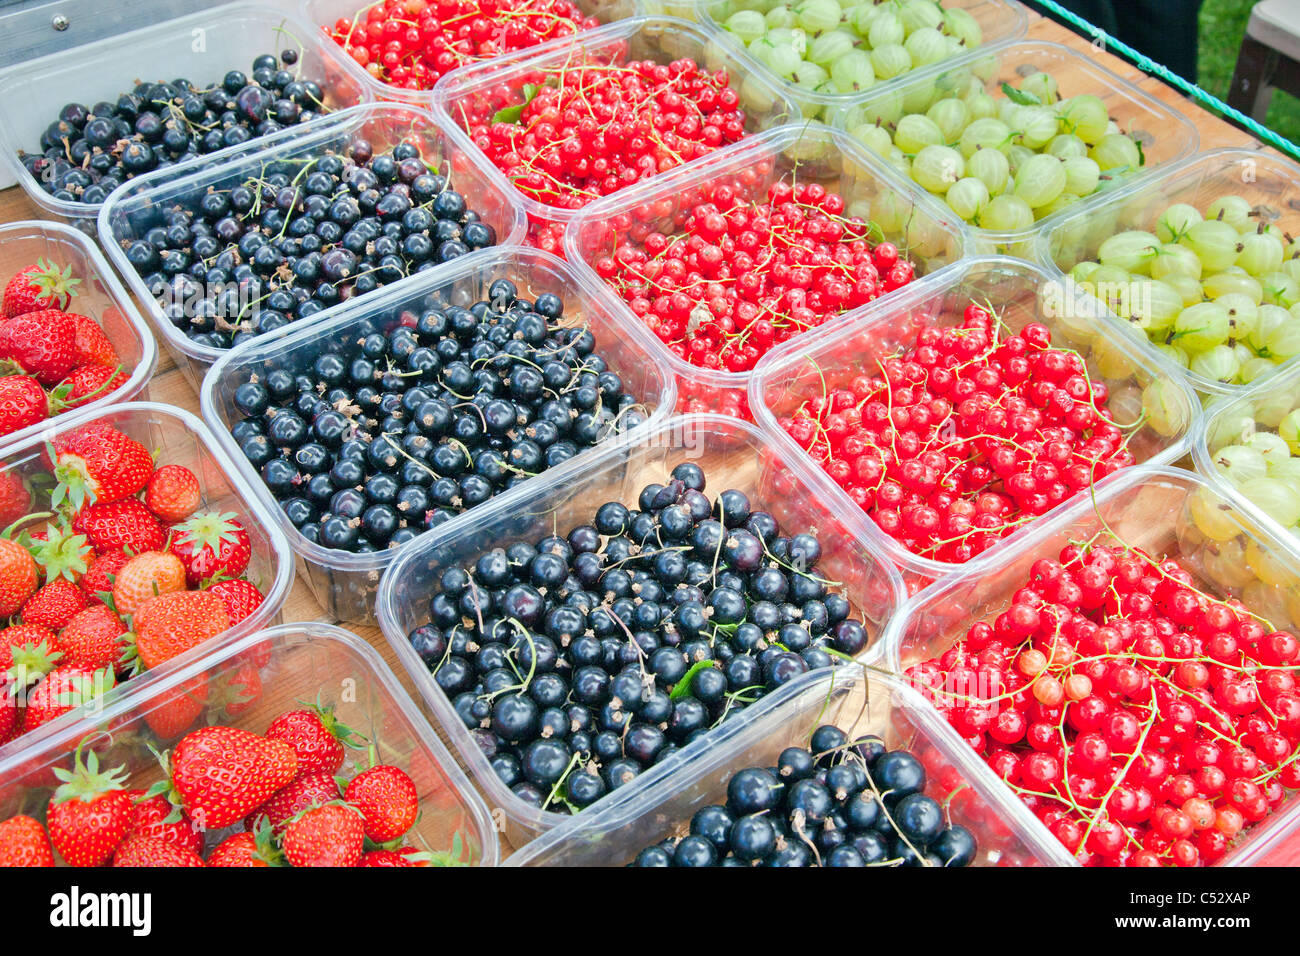 A selection of colourful fresh British soft fruit for sale on a greengrocer's barrow in Somerset England, UK Stock Photo